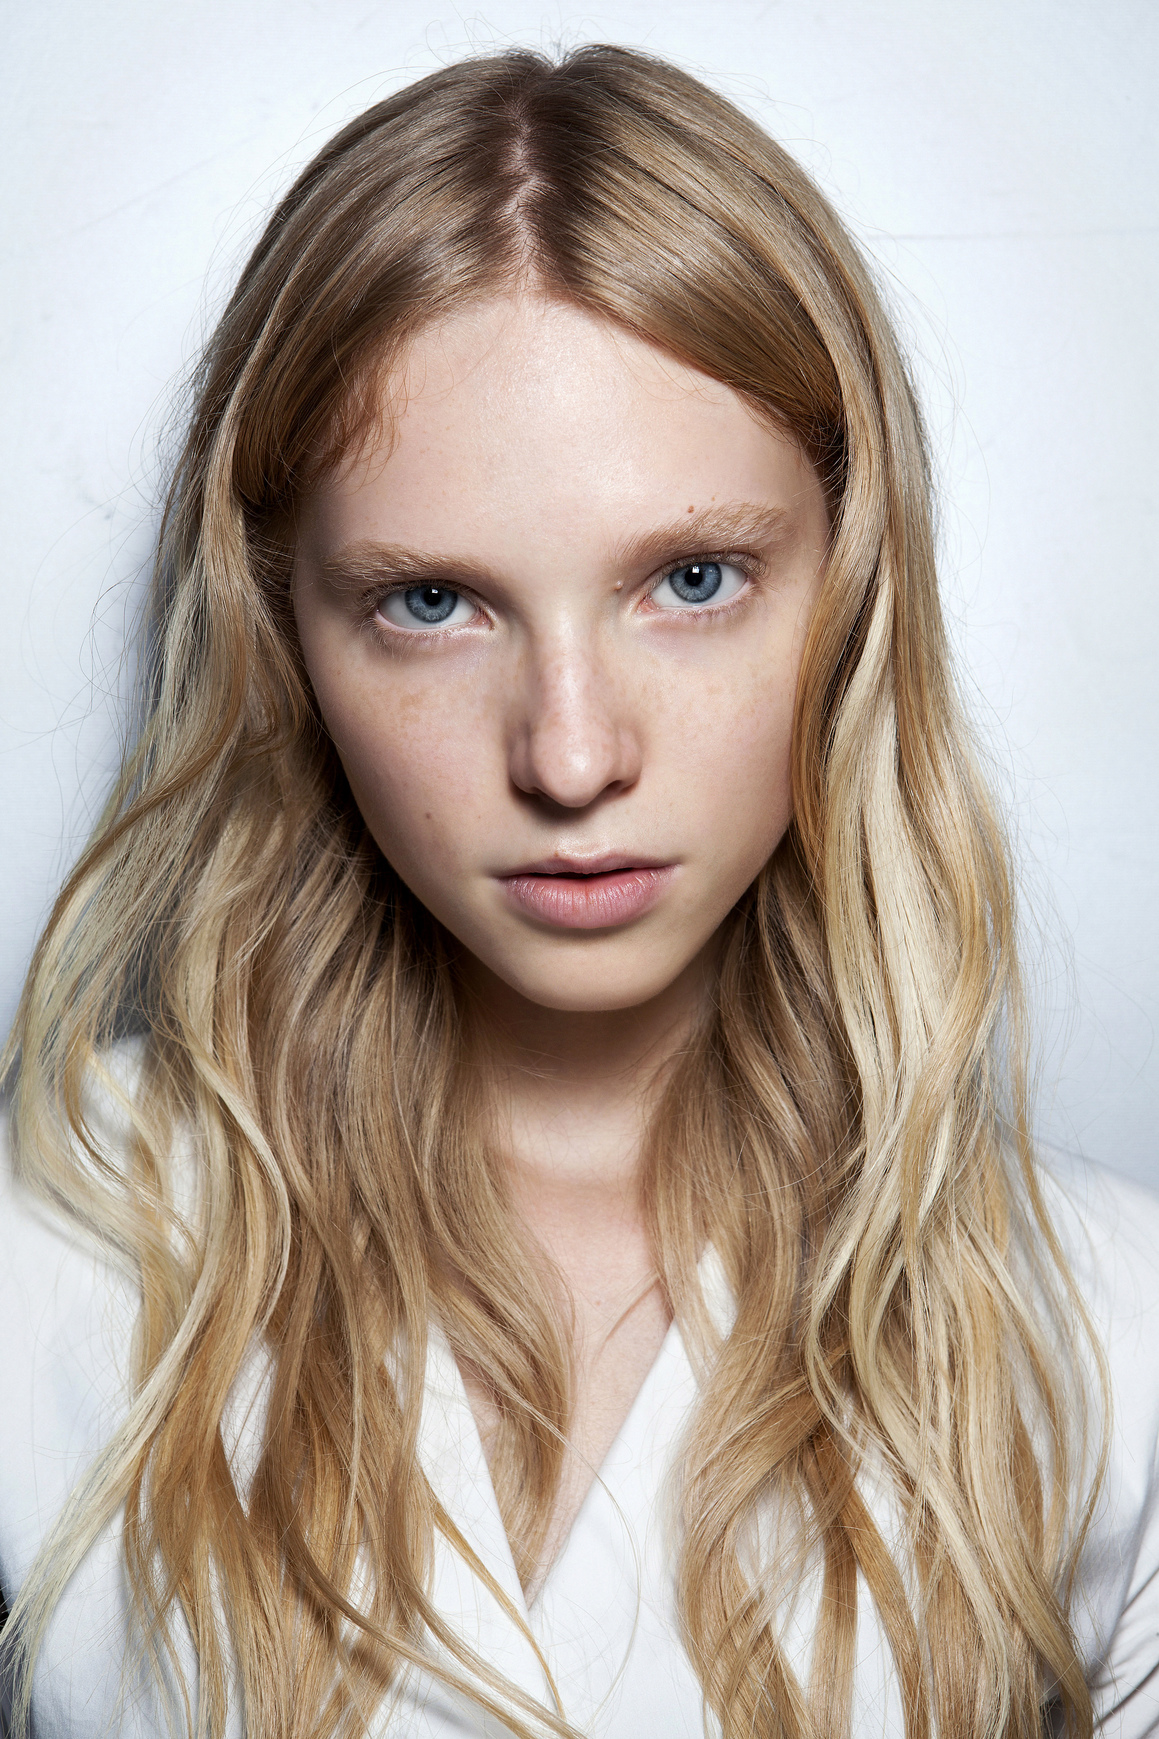 How to Get Natural Highlights | StyleCaster